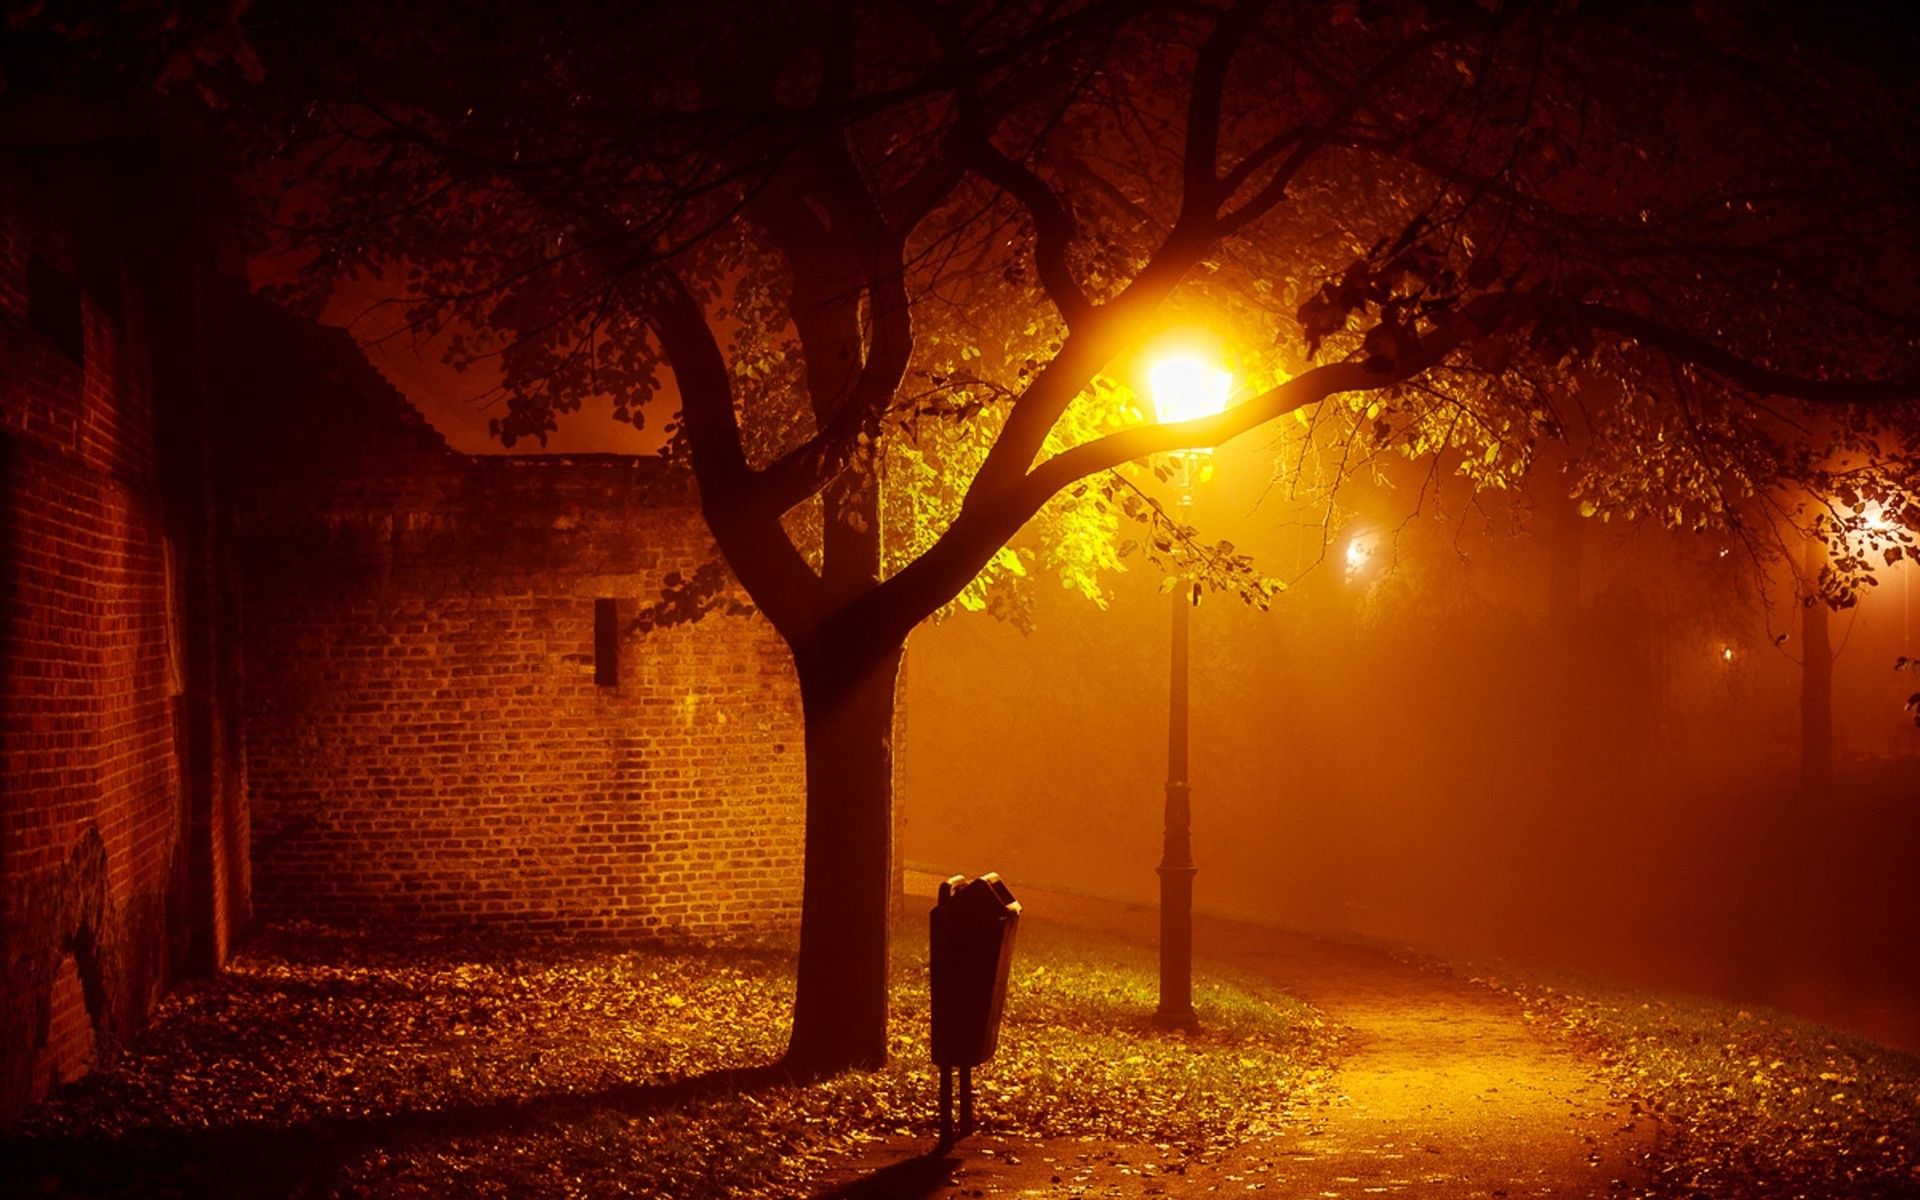 landscapes, Night, Lights, Mood, Autumn, Fall, Seasonal, Fog, Mist, Places, Houses, Buildings, Architecture, Trees, Lamps, Lamp posts, Photography Wallpaper HD / Desktop and Mobile Background